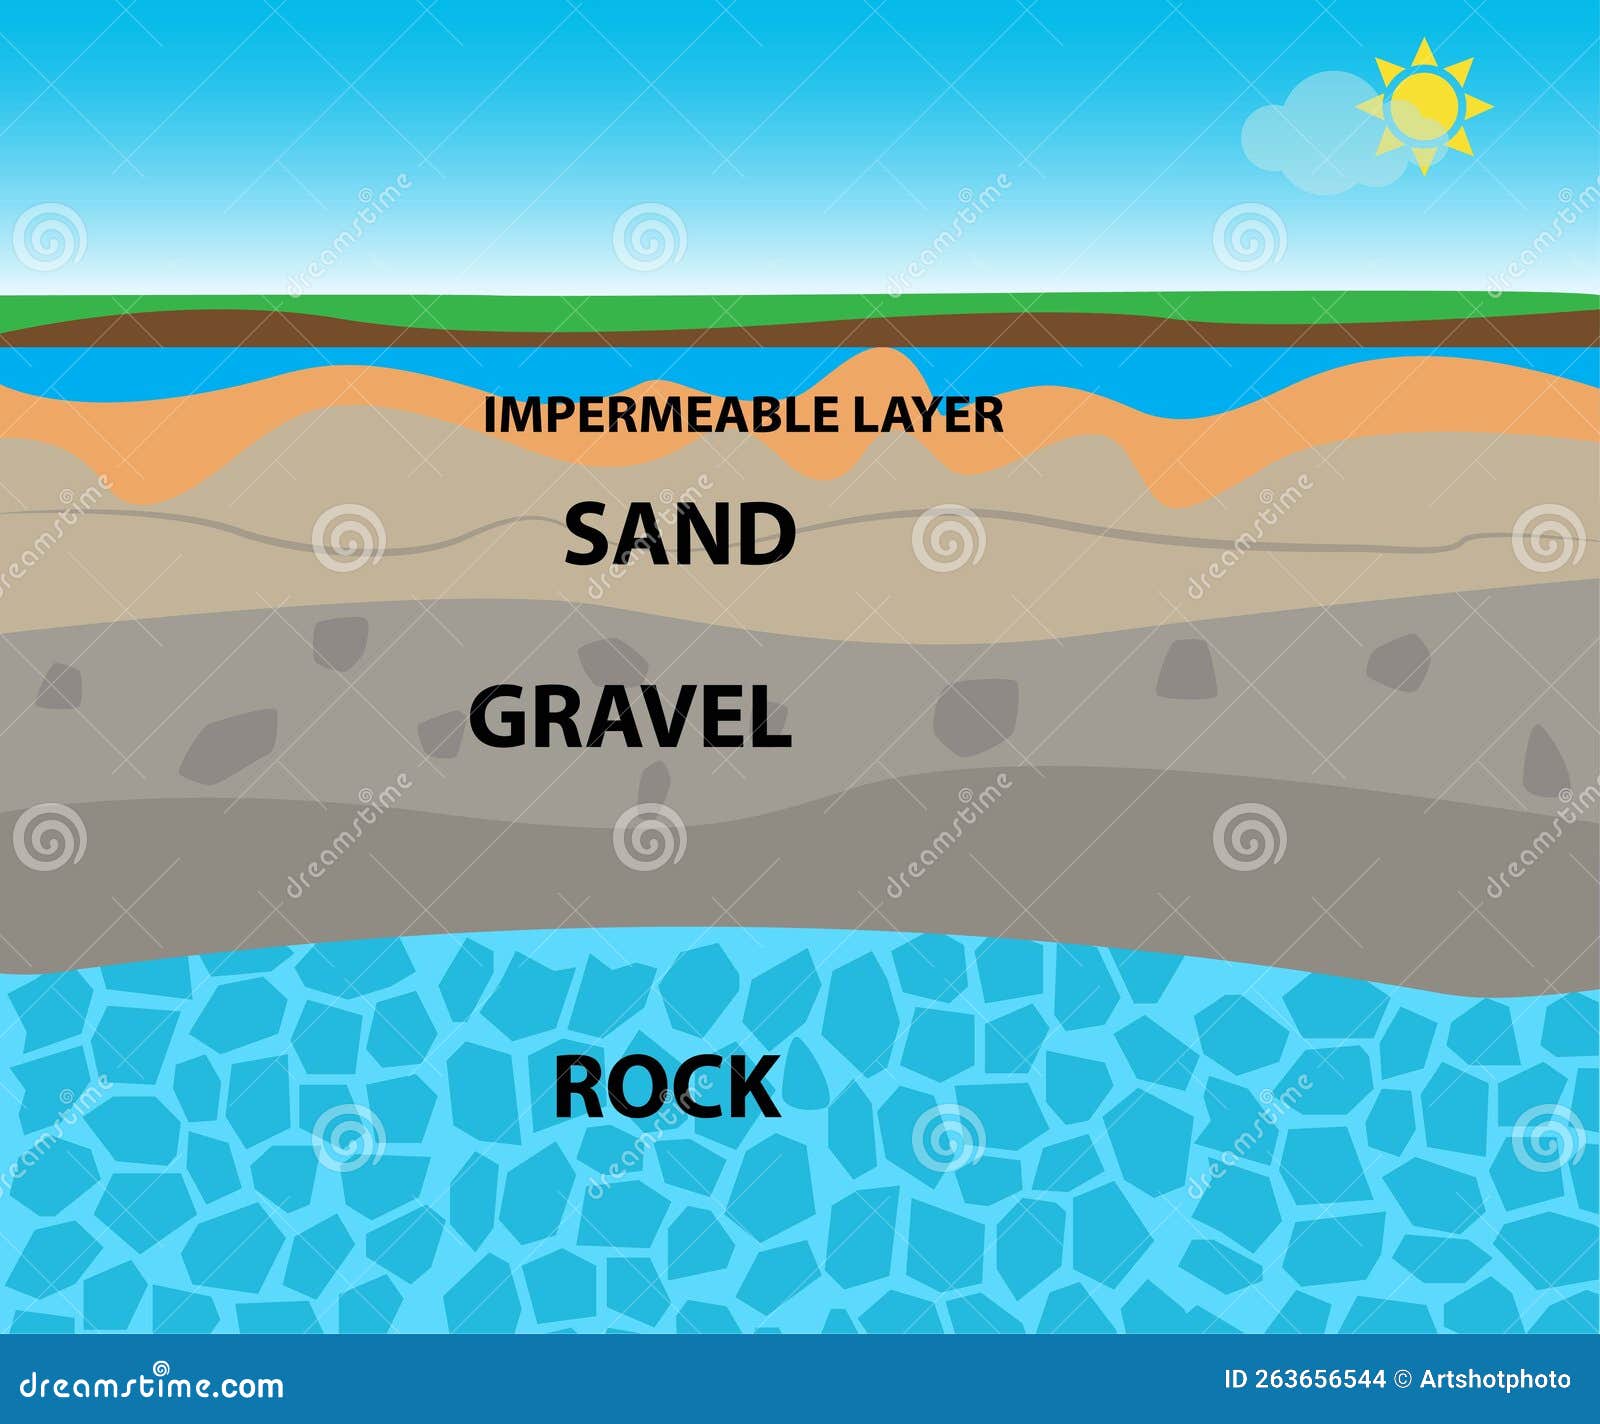 soil layers with sand, gravel, rock, impermeable layer and ground water aquifer